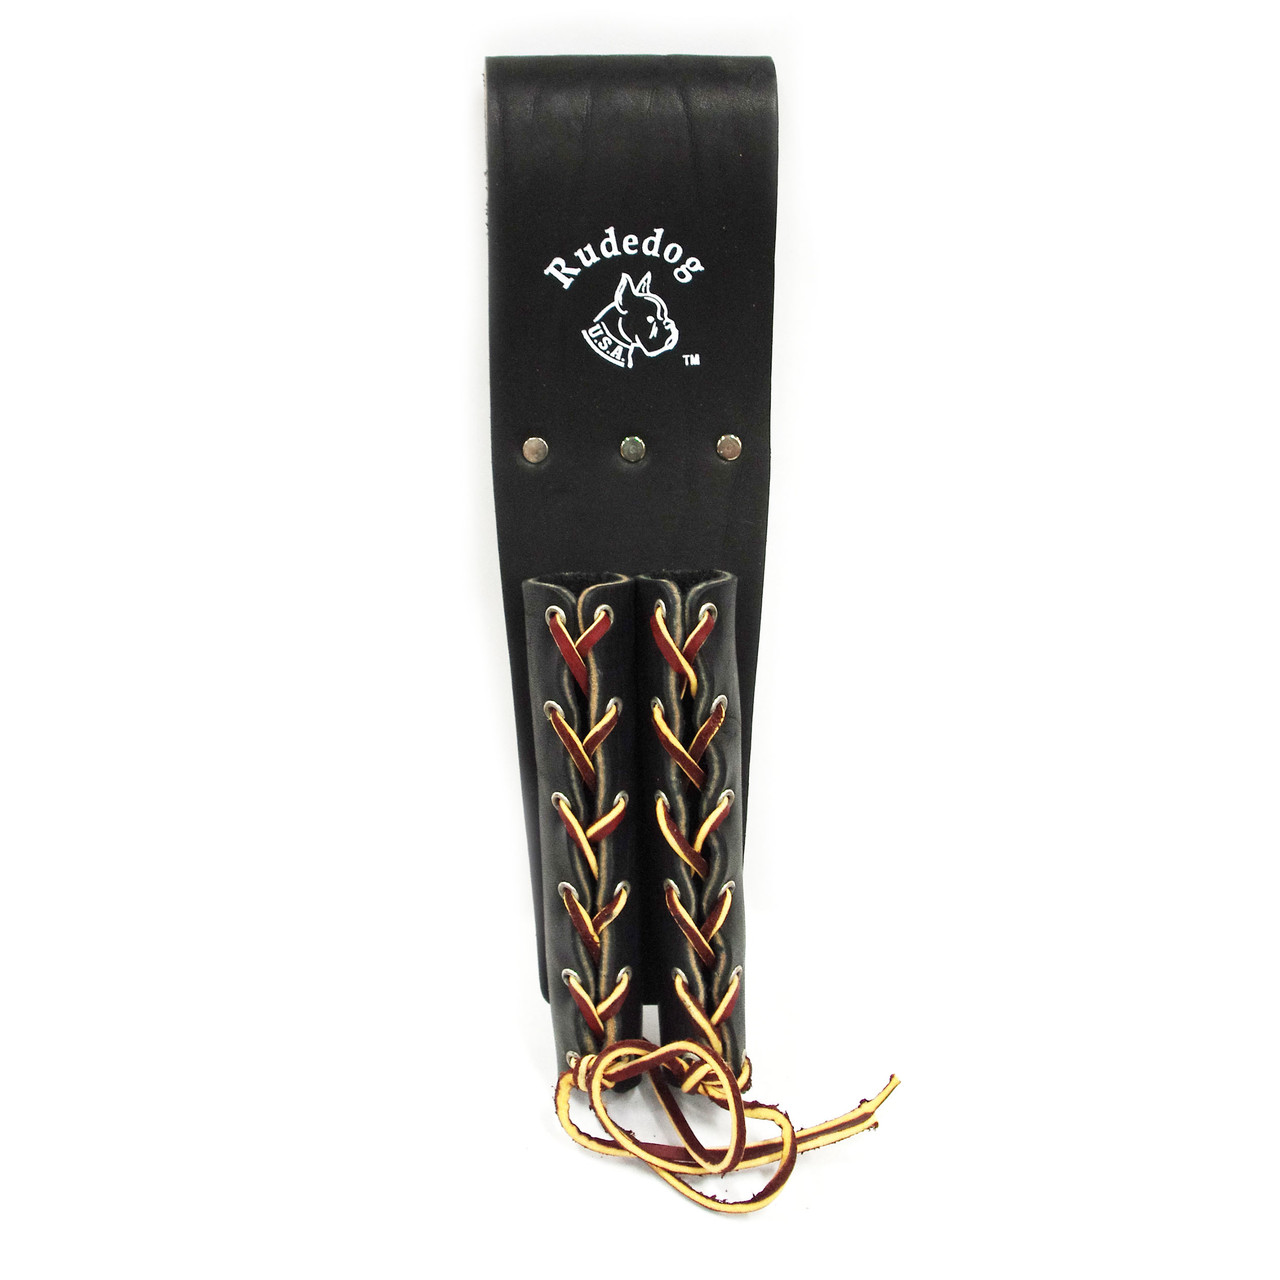 Rudedog Double Bull Pin Holder from Columbia Safety